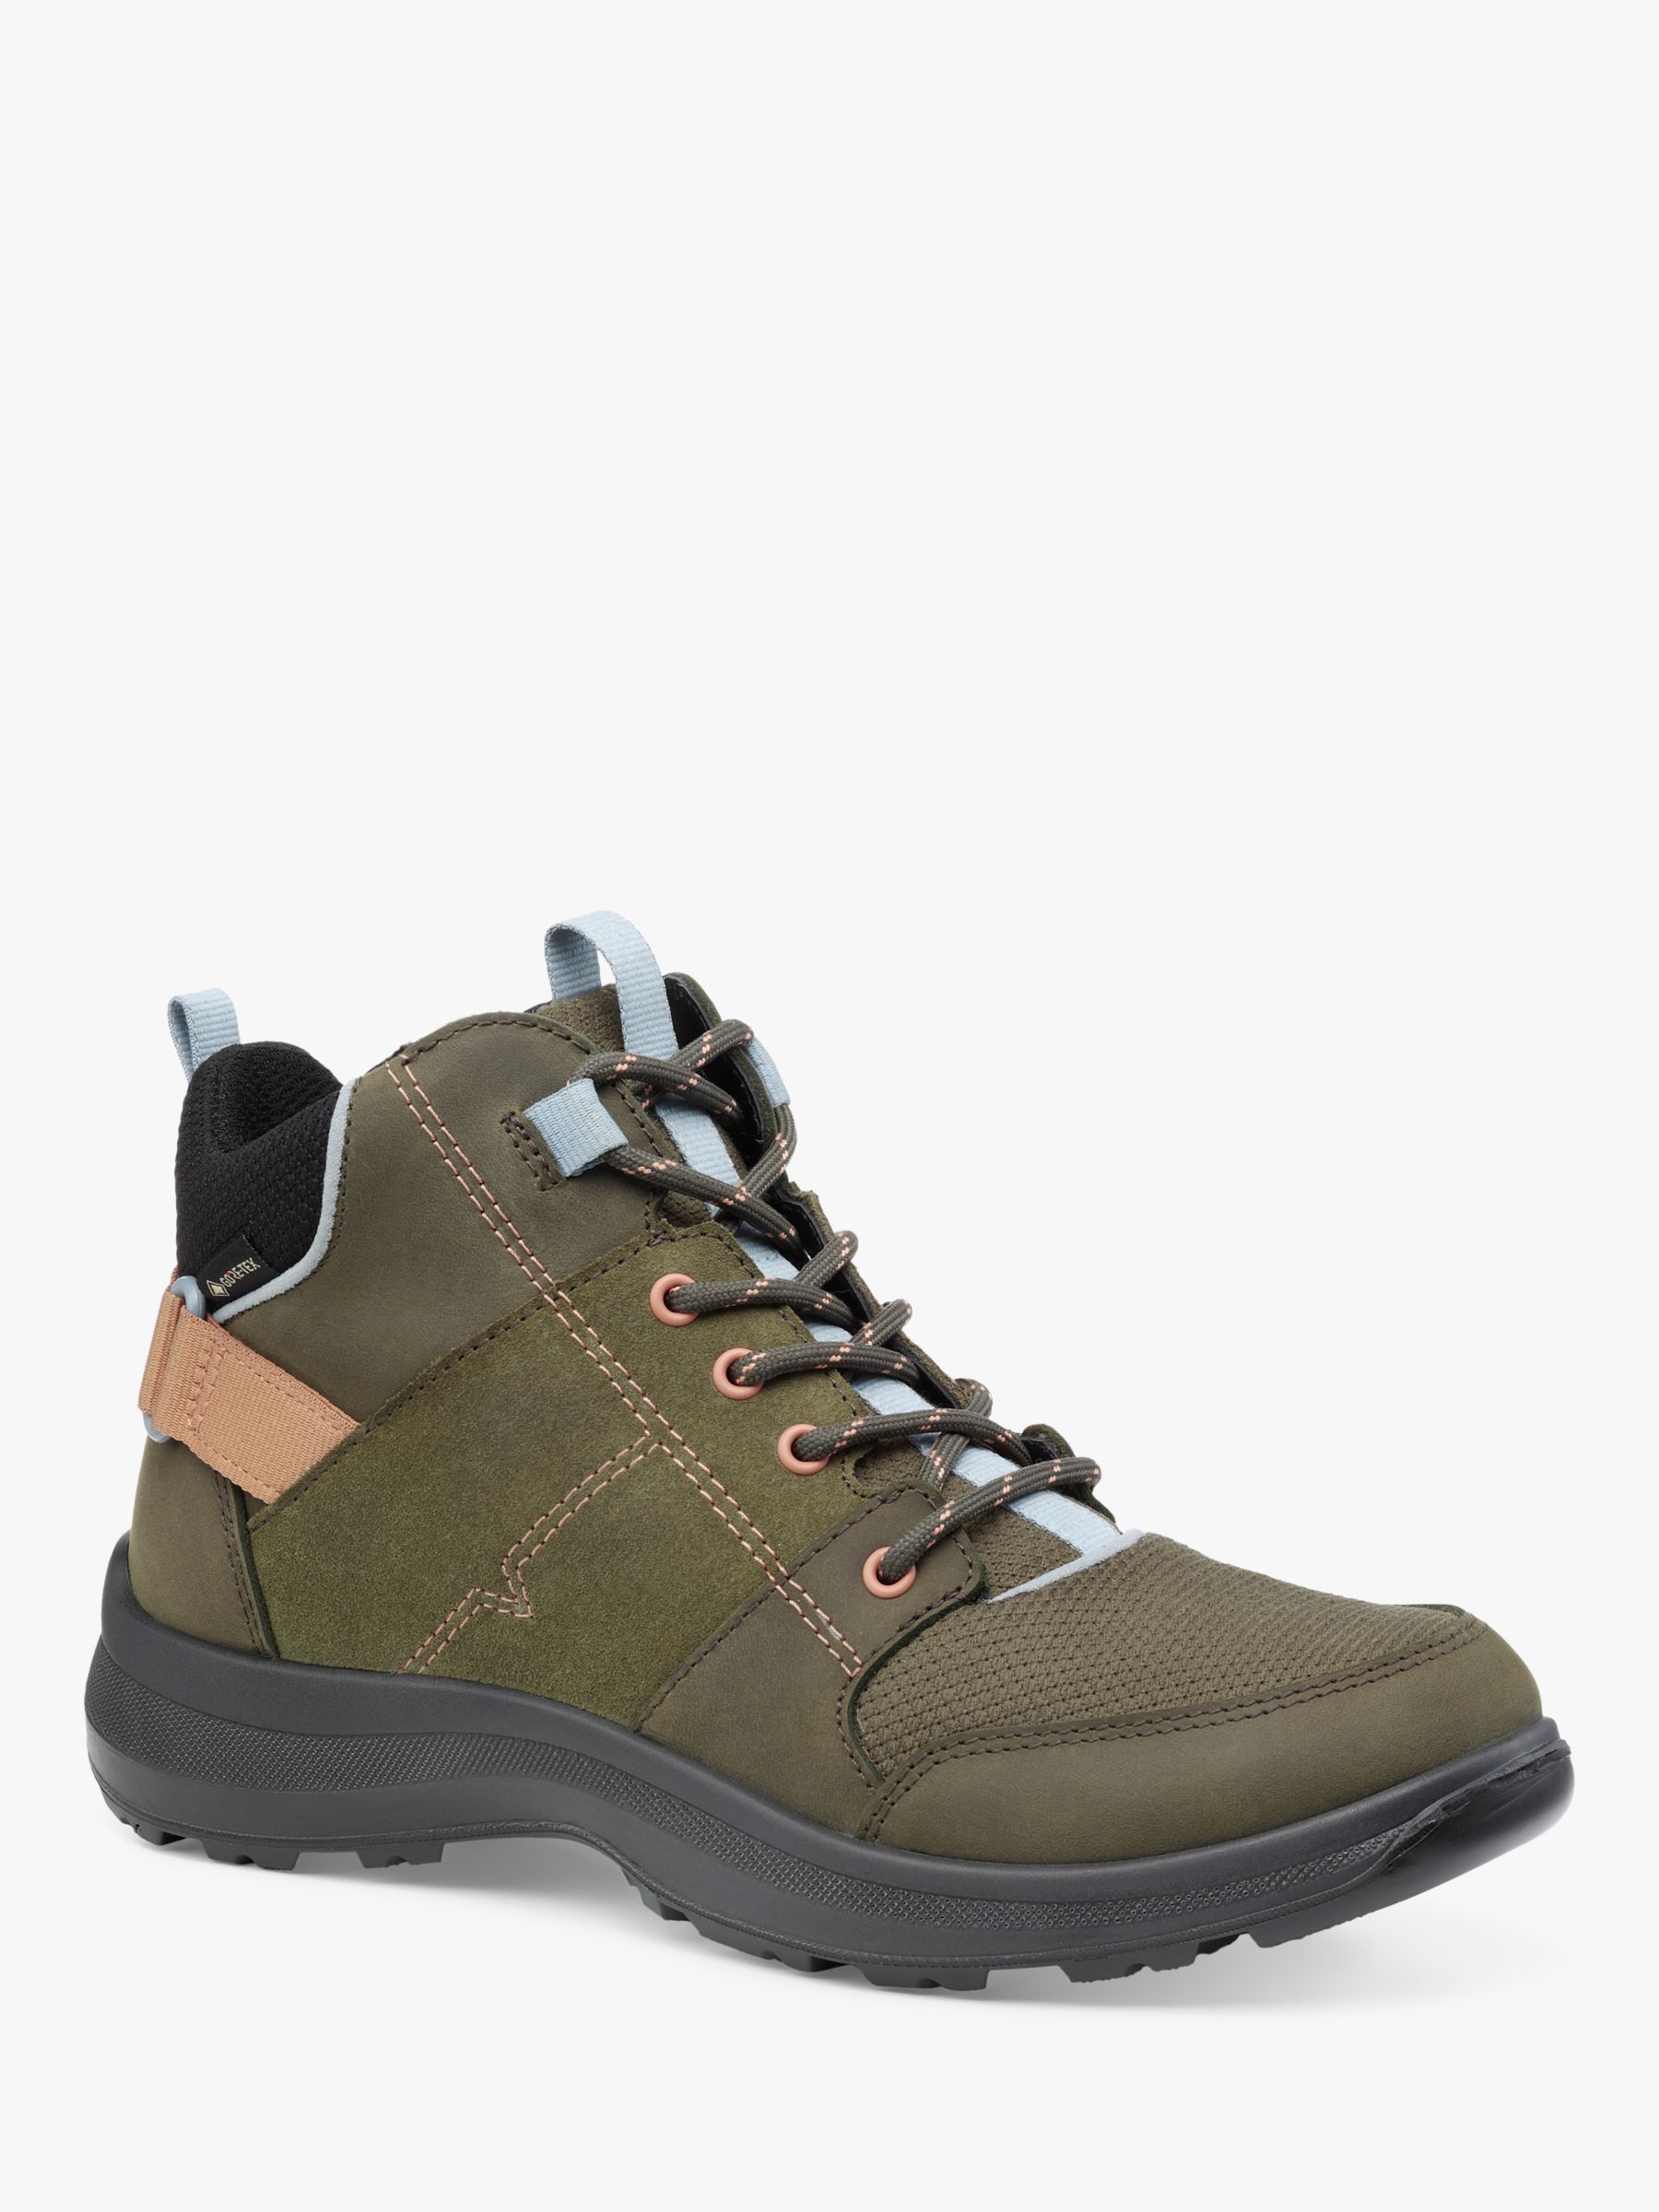 Buy Hotter Trail GTX Suede and Nubuck Hiking Boots, Khaki Online at johnlewis.com